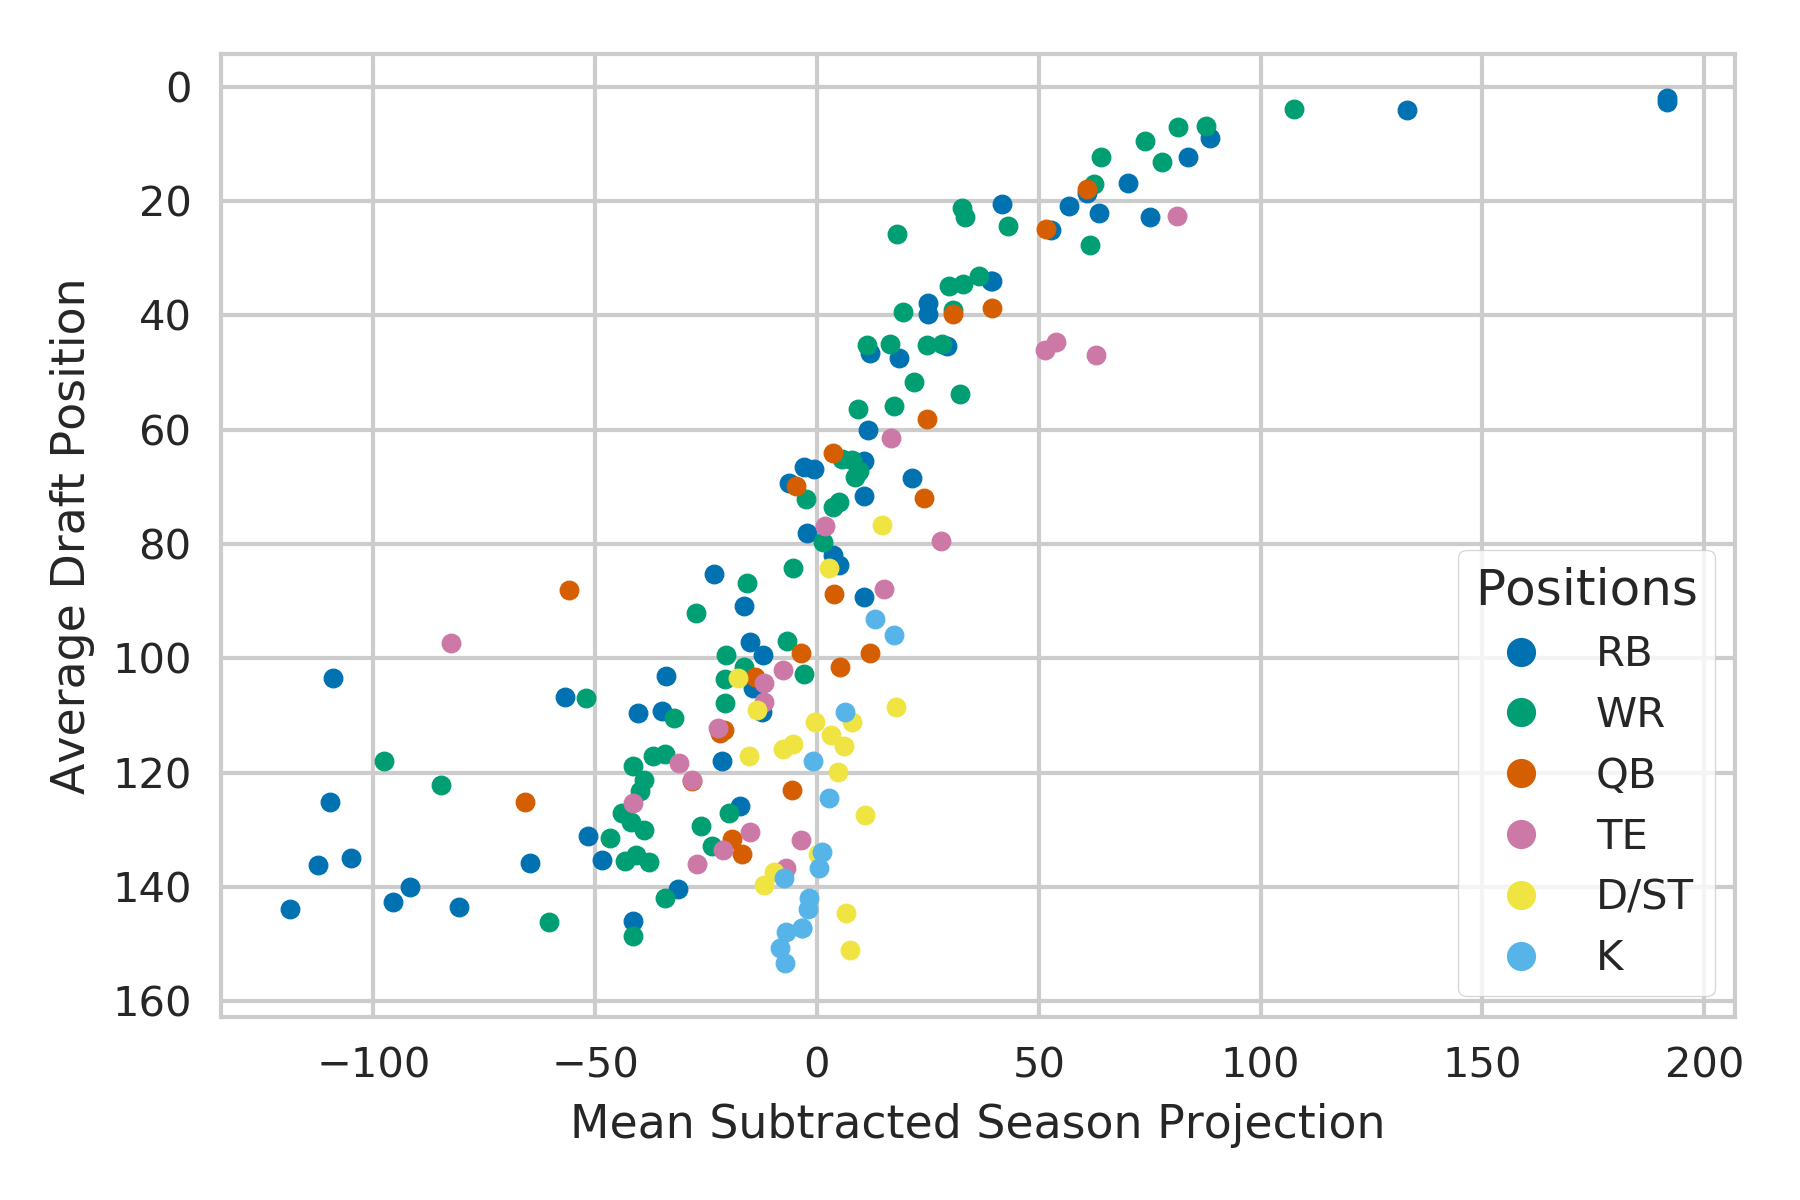 Average Draft Position vs. Mean Subtracted Season Projections